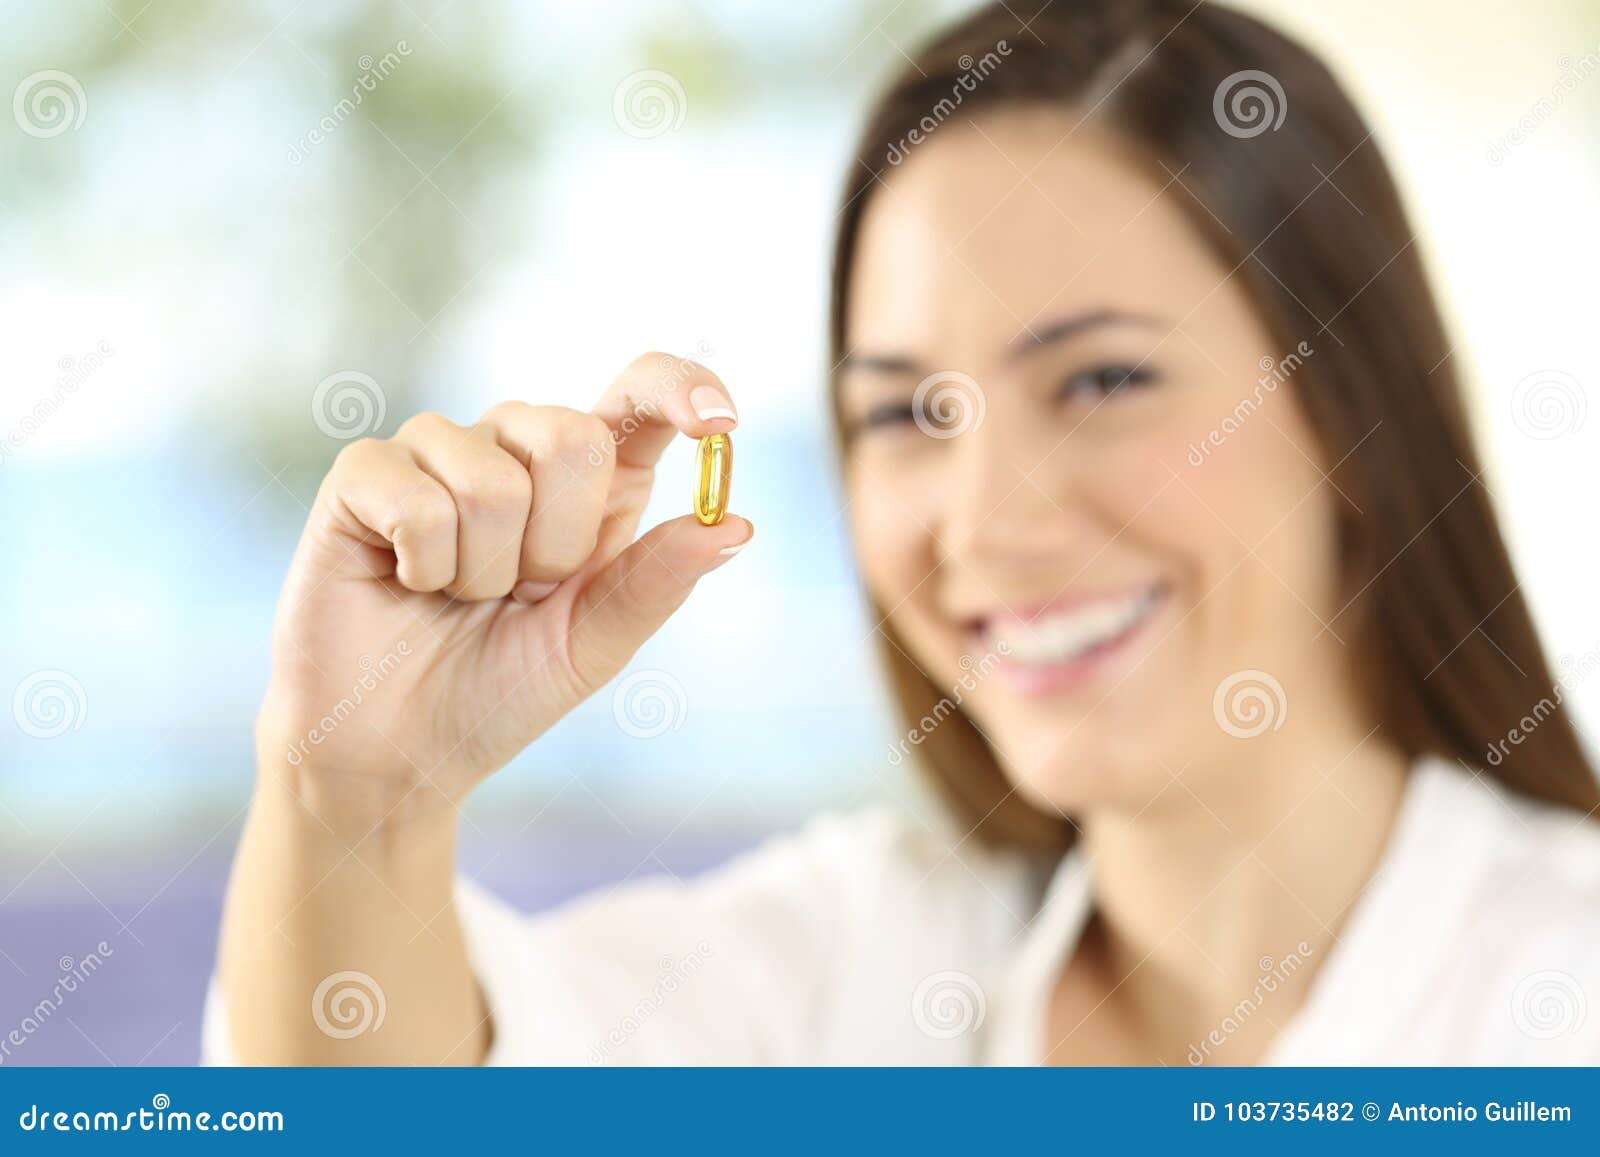 Happy Woman Showing An Omega 3 Pill Stock Photo - Image of ...